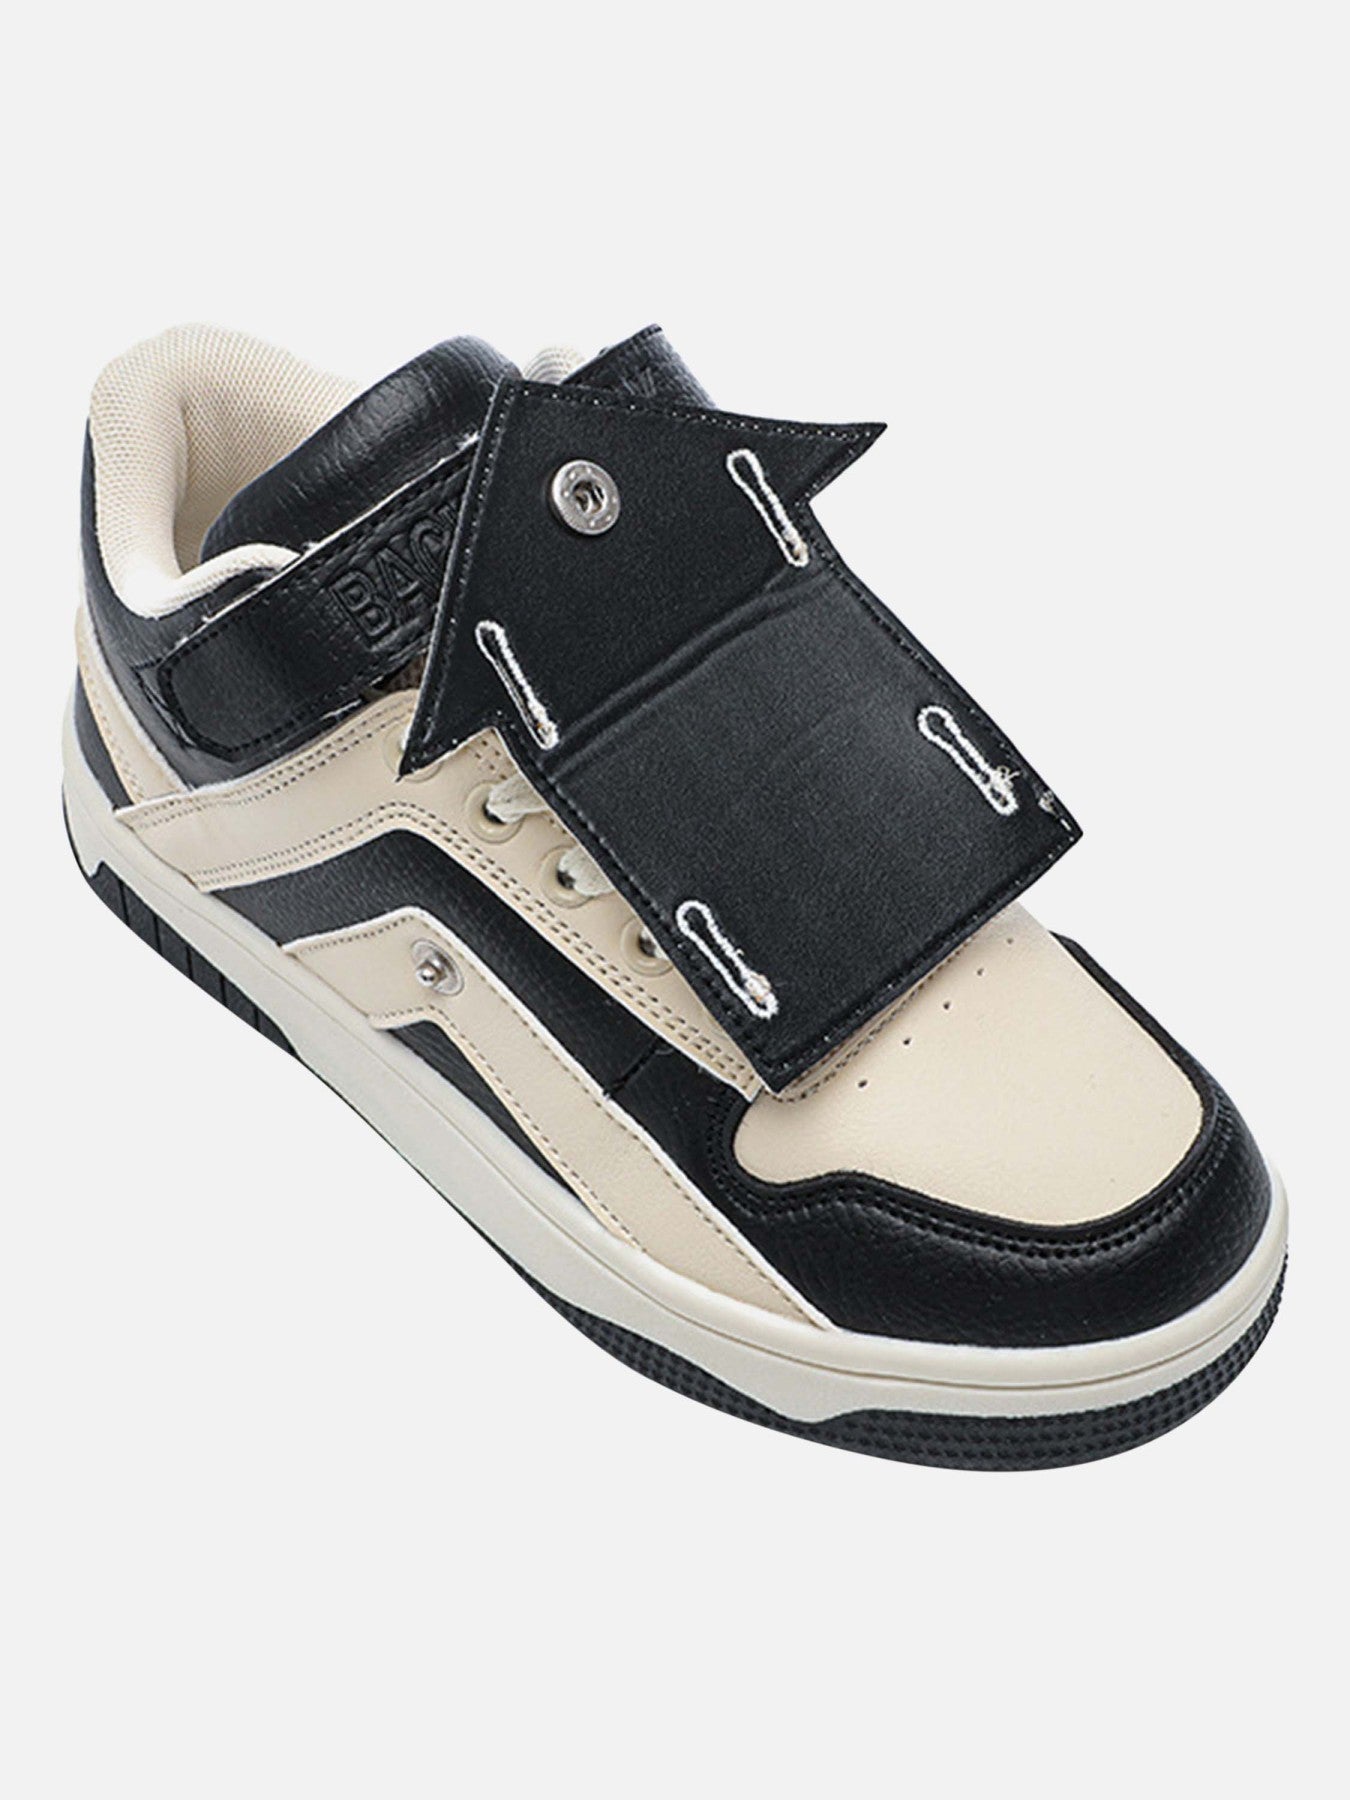 Thesupermade Velcro Removable Couple Board Shoes - 1667